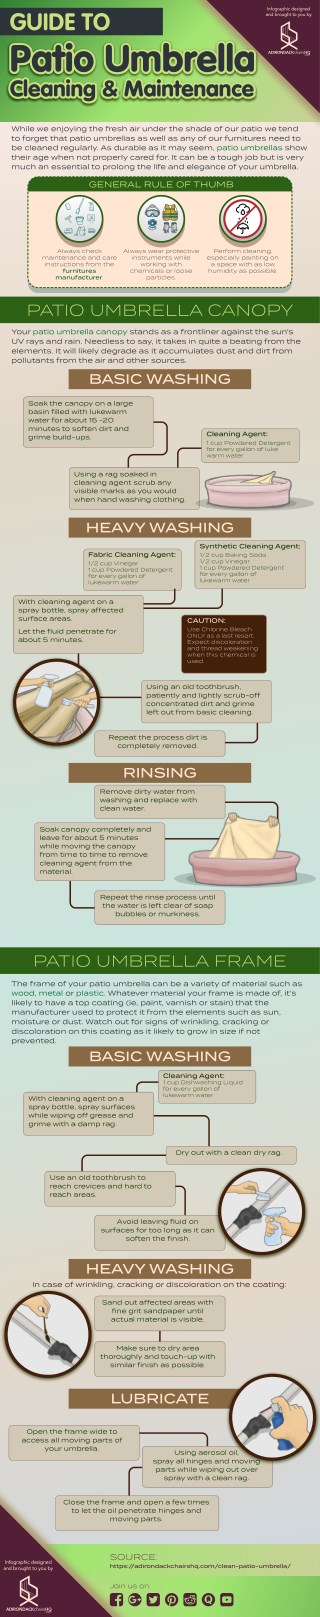 Patio Umbrella Cleaning and Maintenance